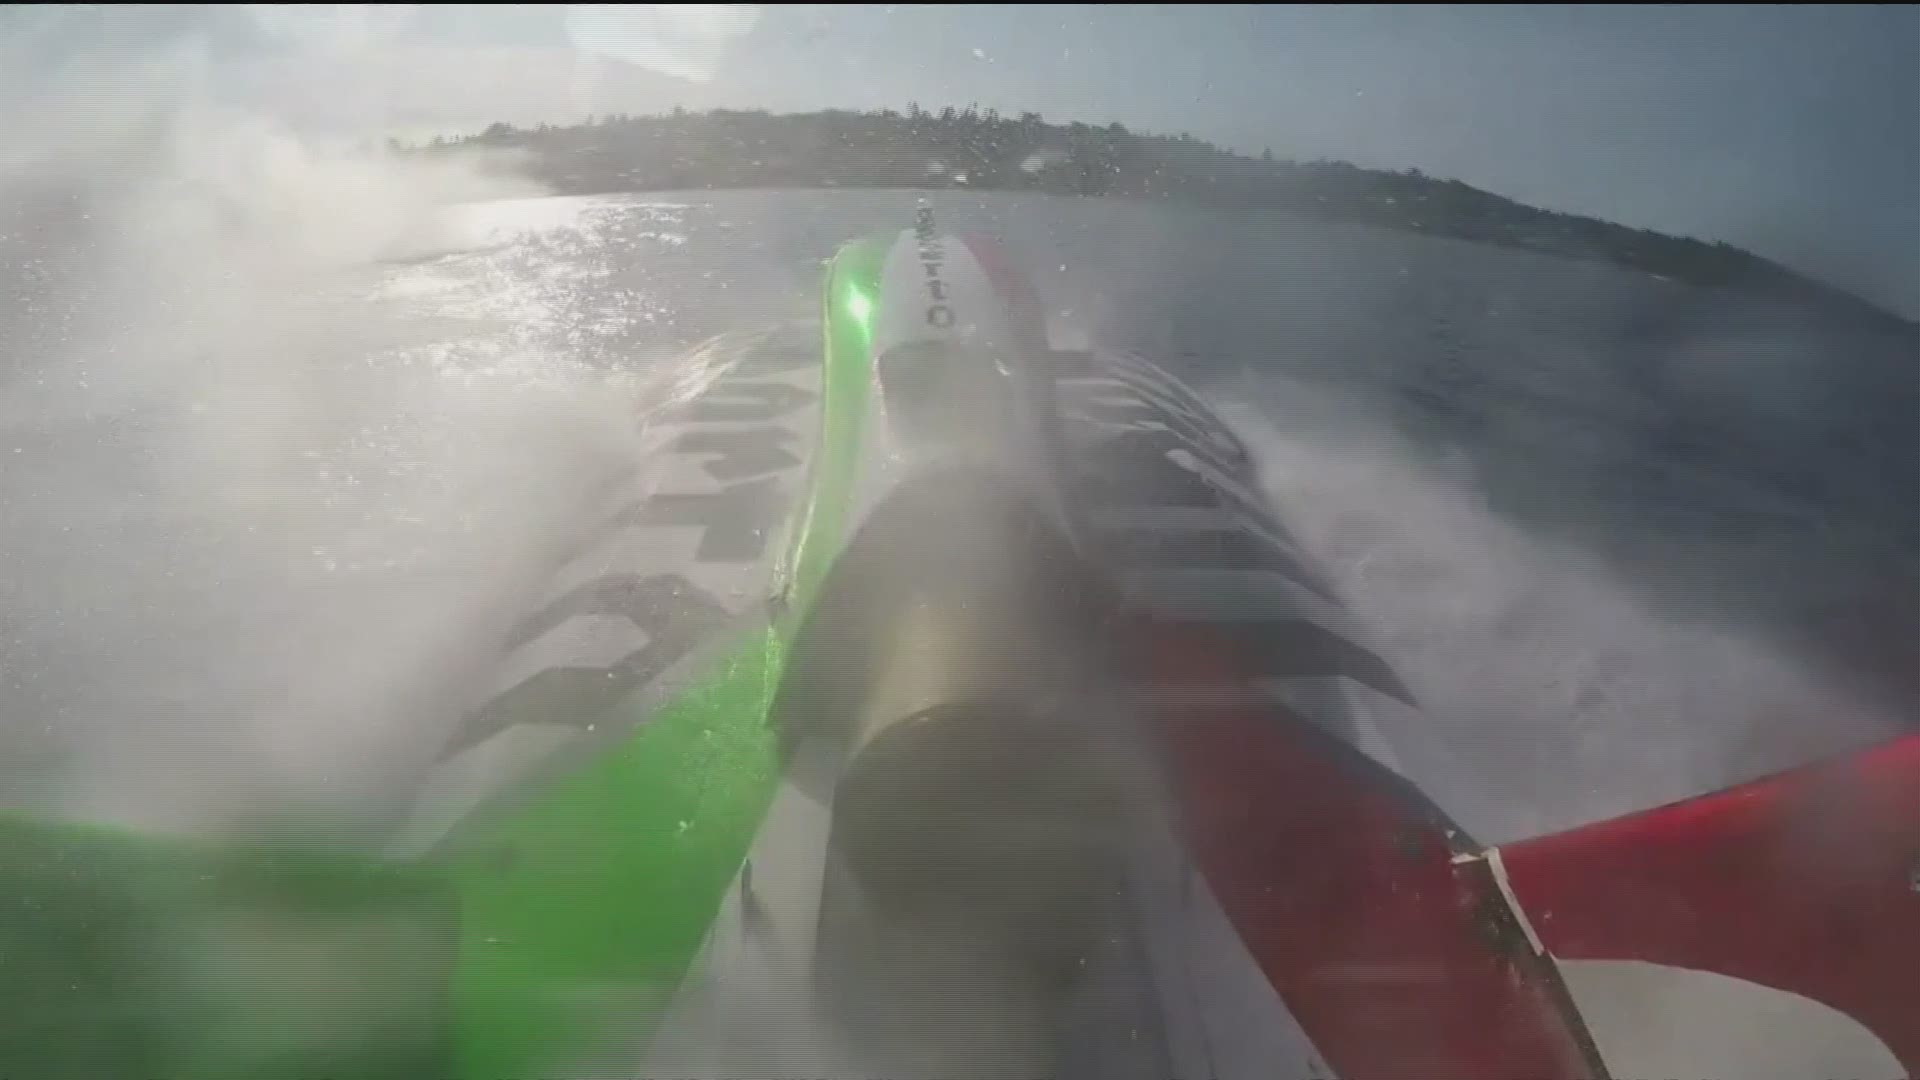 WATCH Hydroplane flips 60 feet in the air during Seafair final